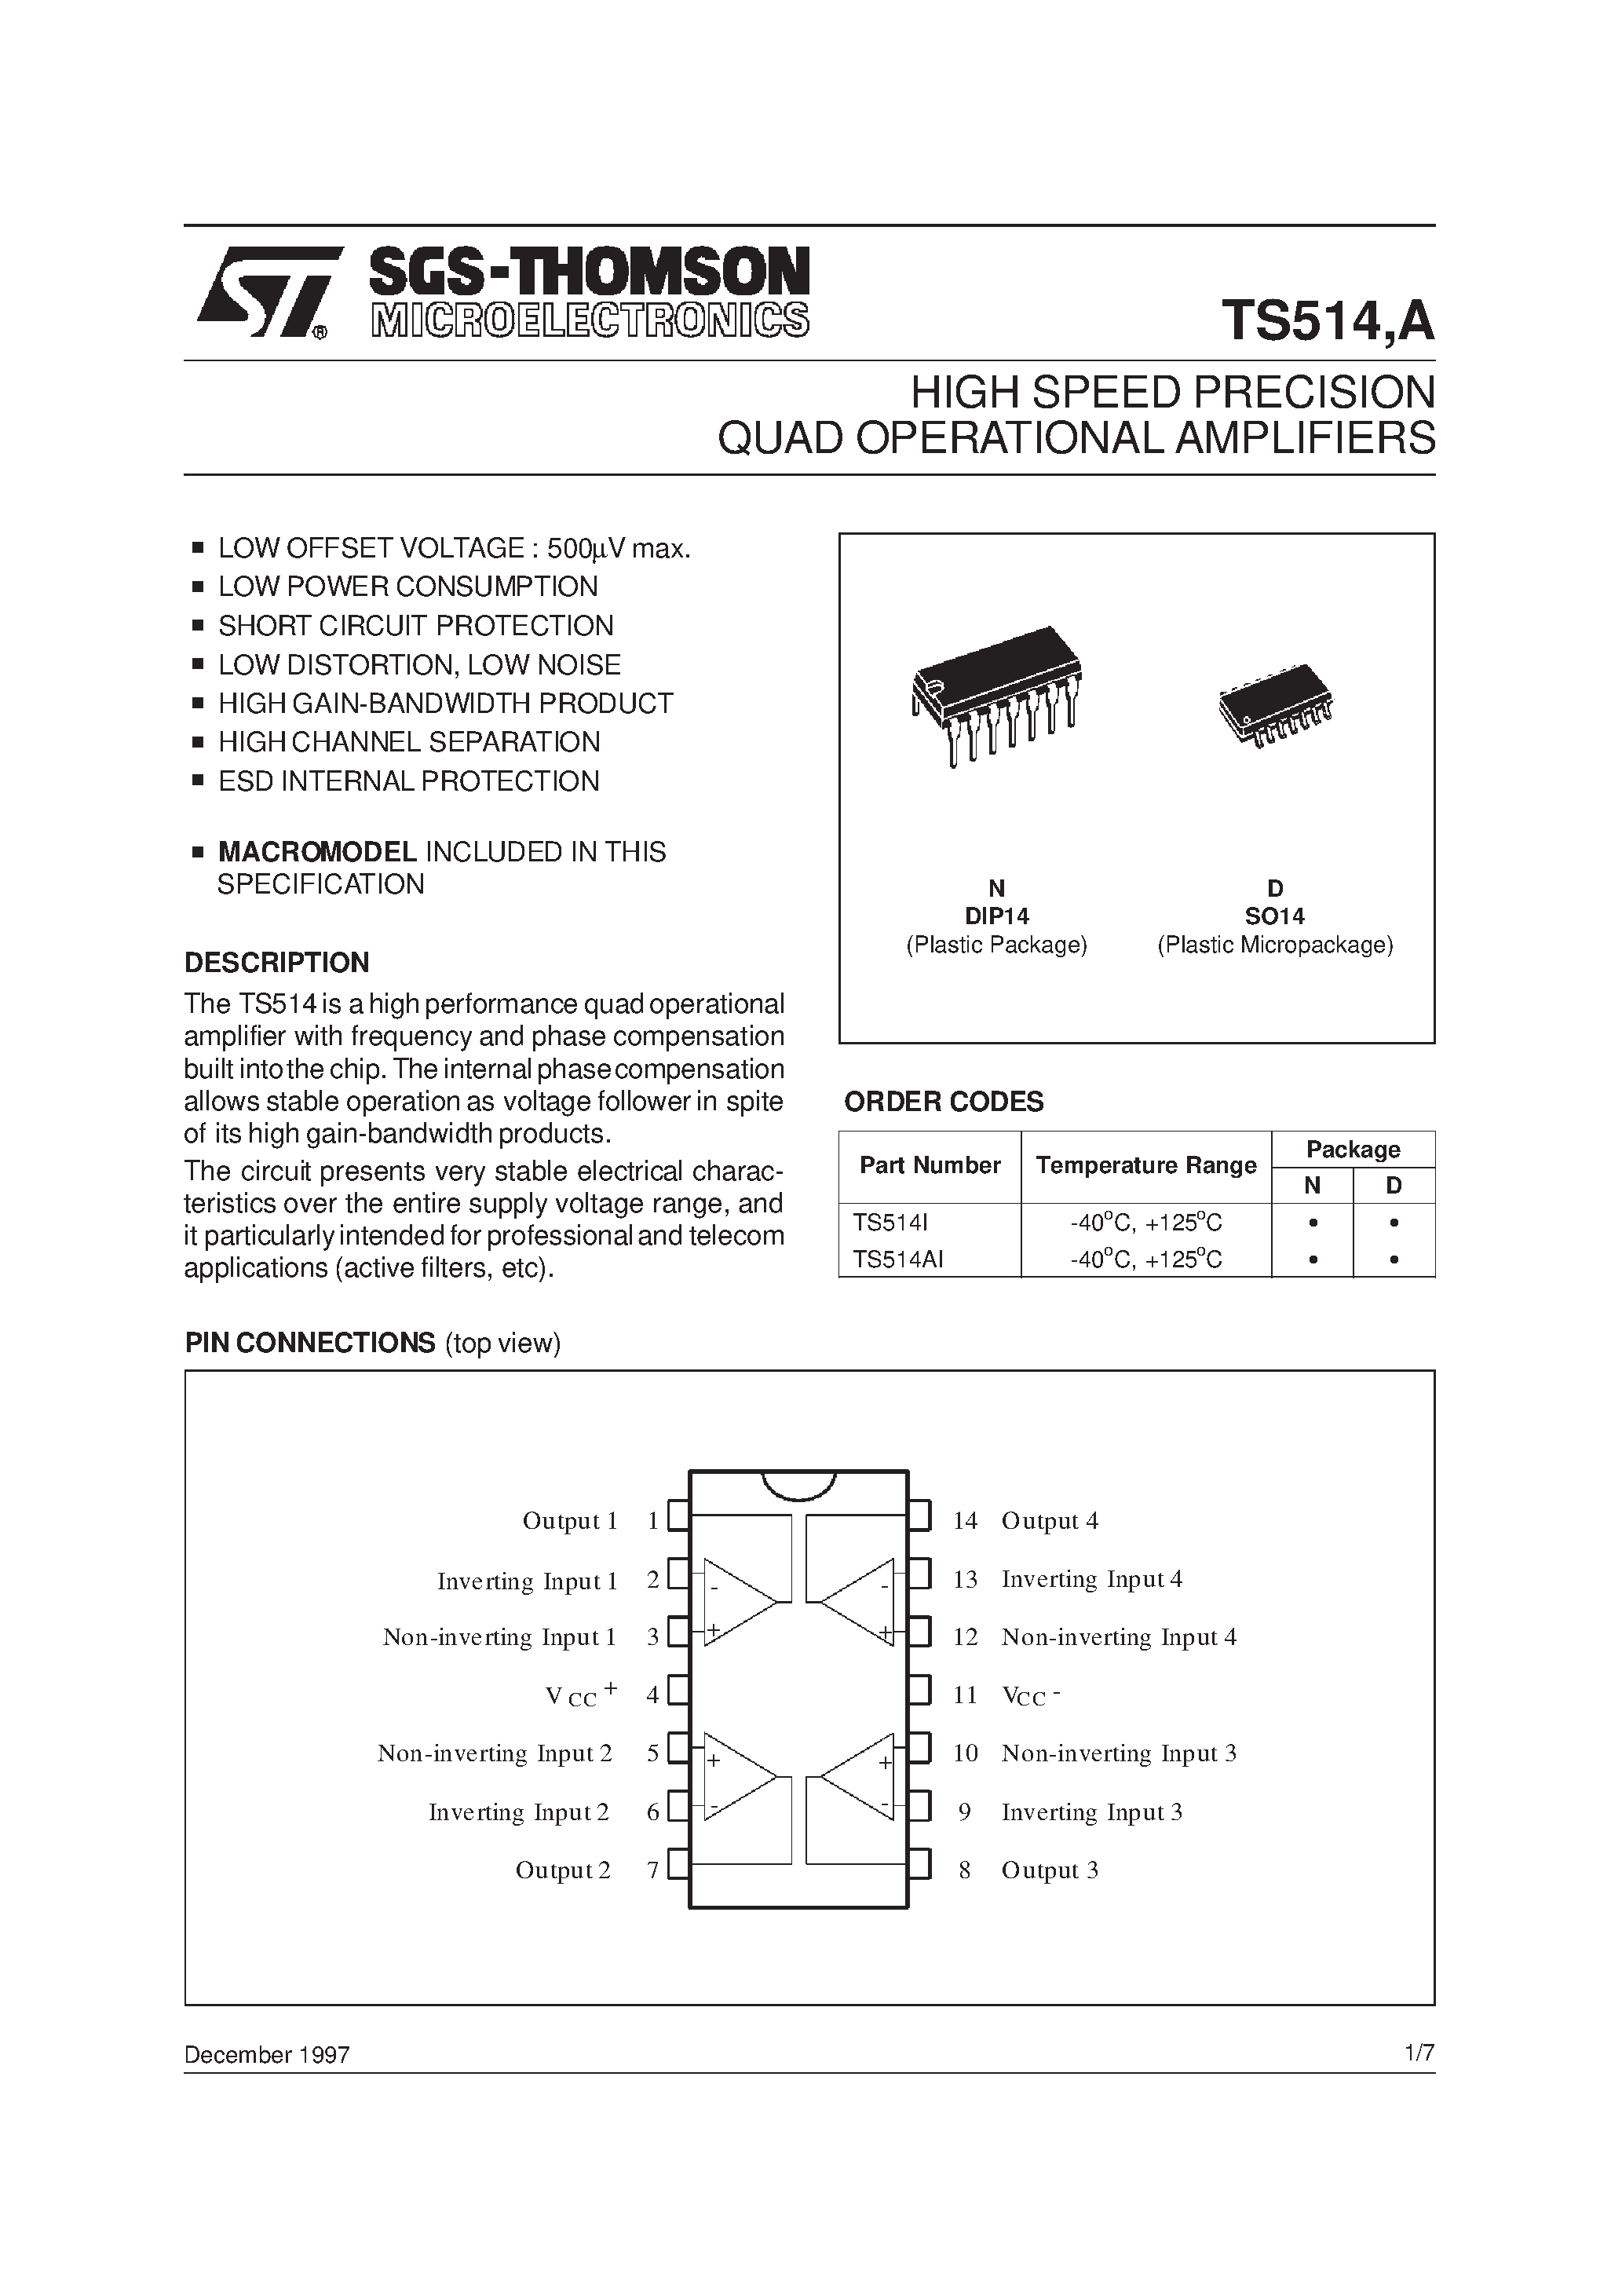 Datasheet TS514IN - HIGH SPEED PRECISION QUAD OPERATIONAL AMPLIFIERS page 1